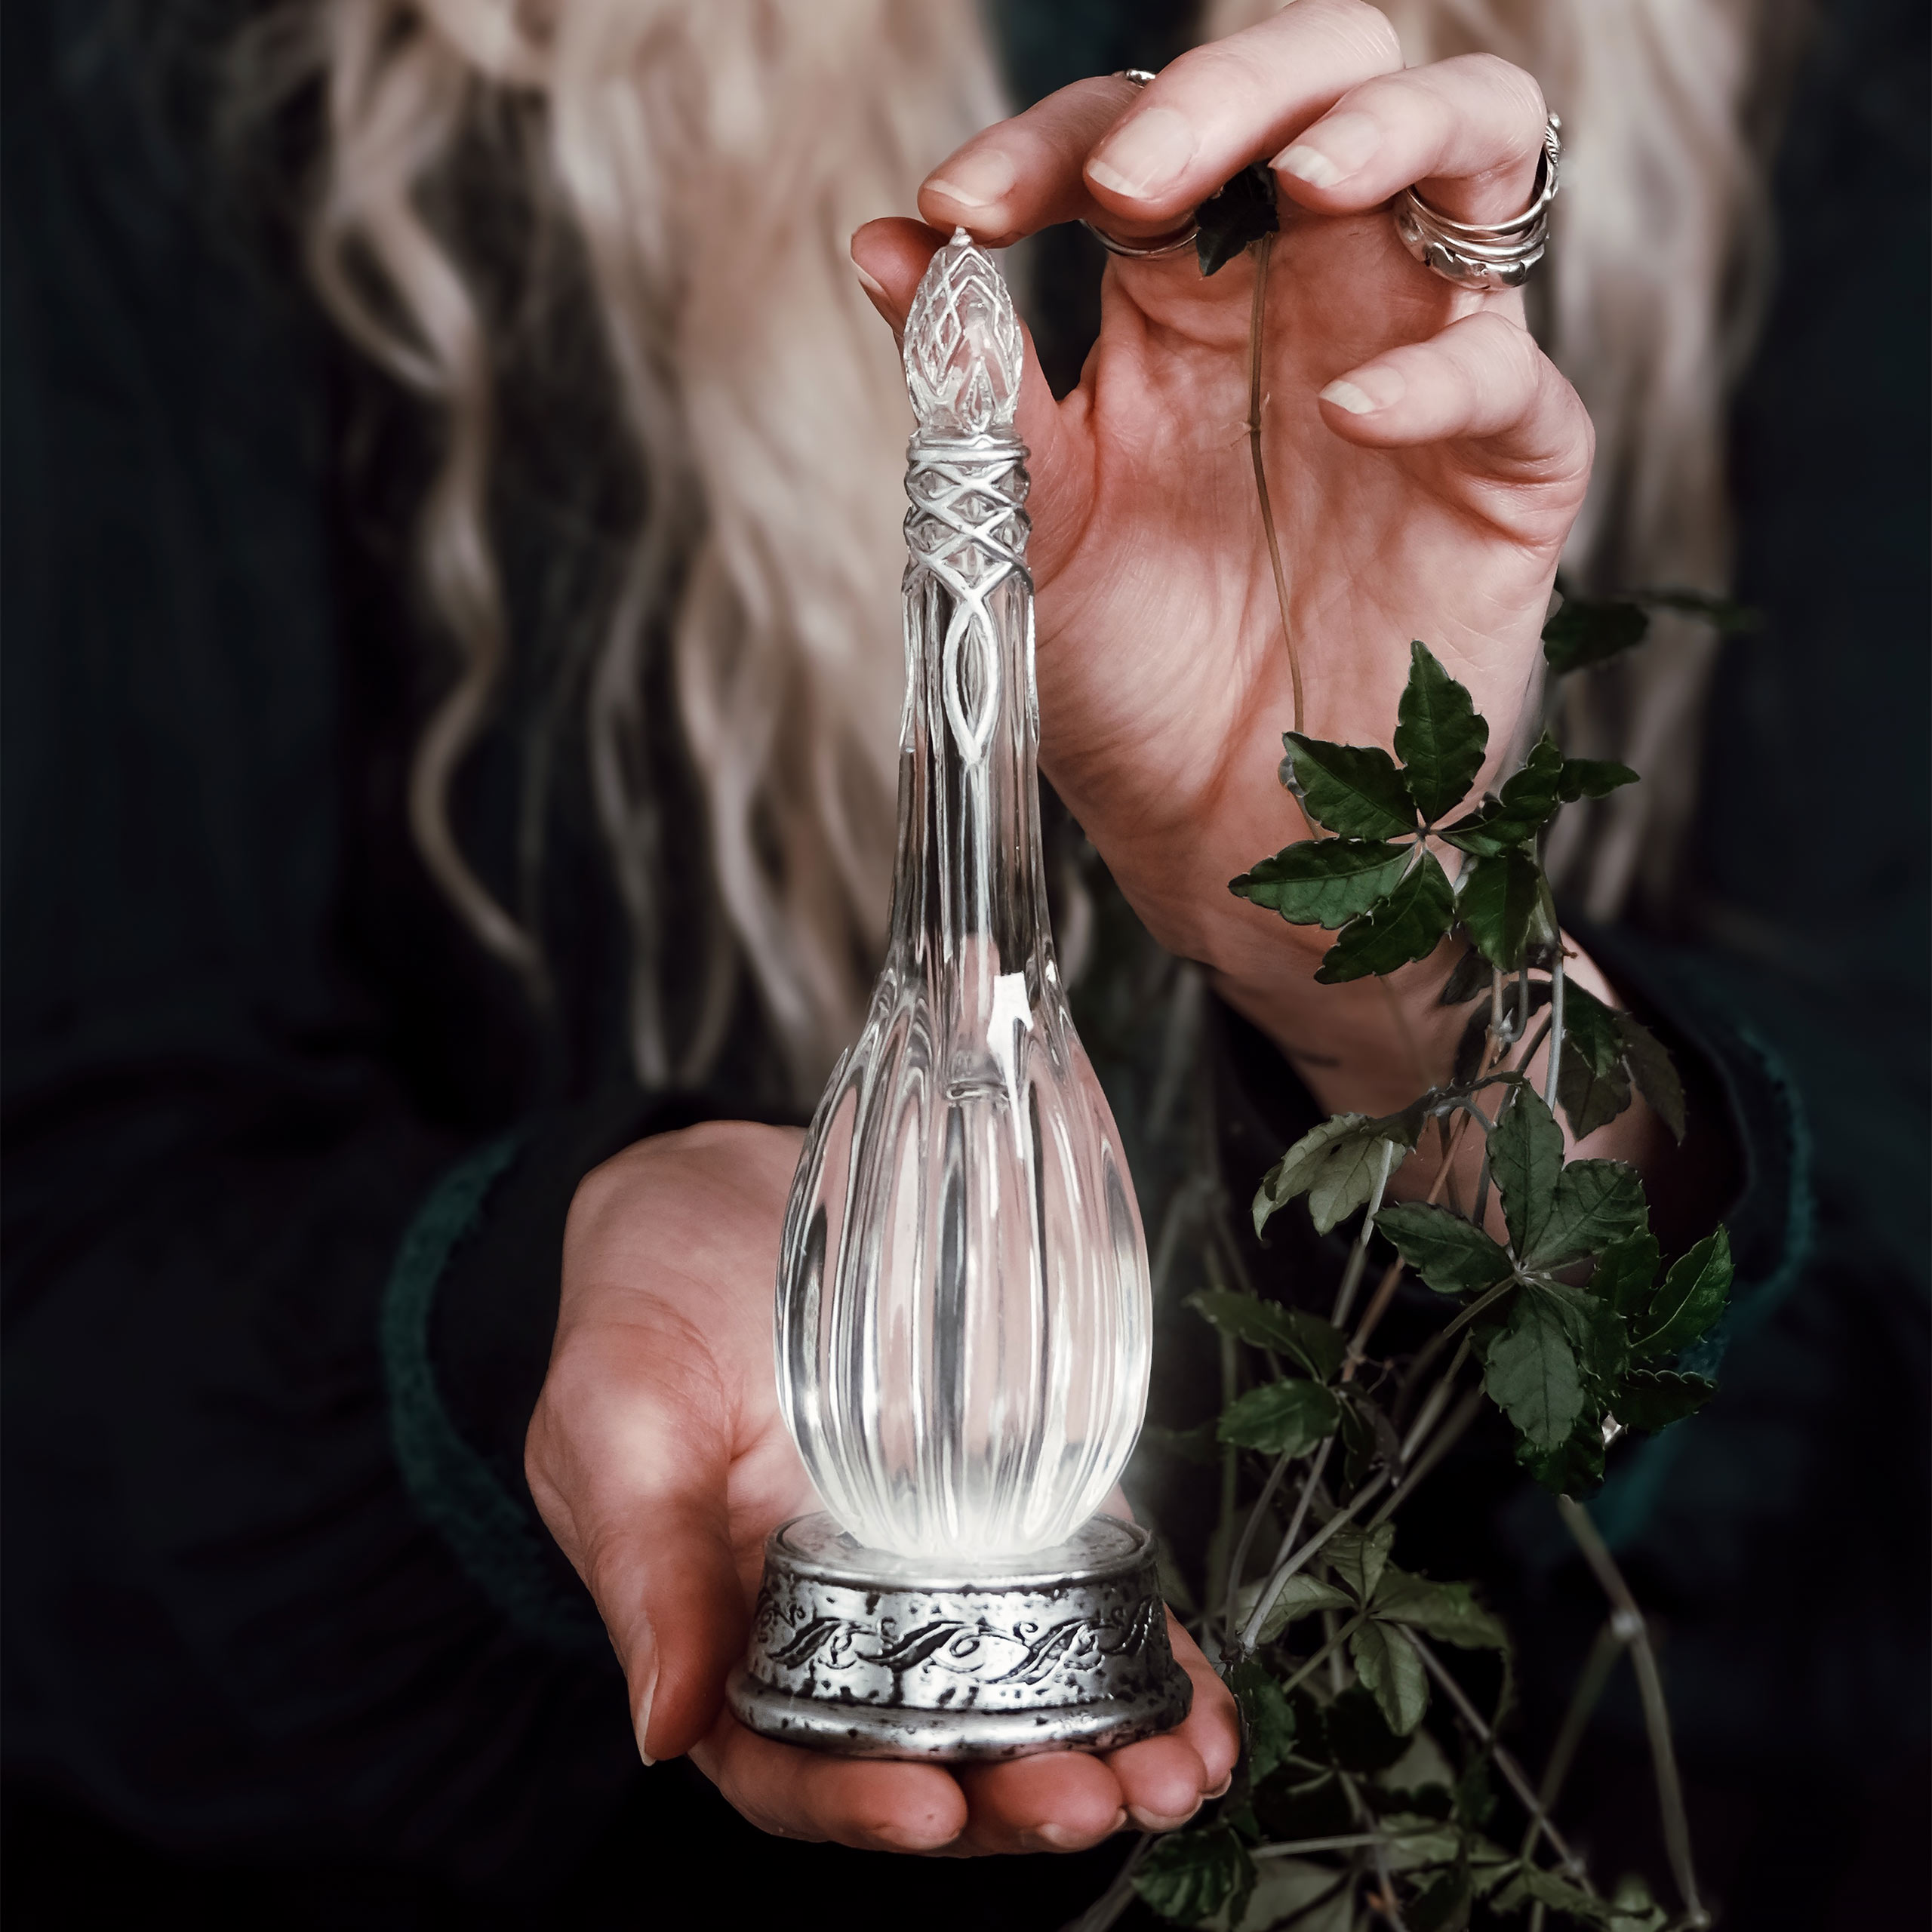 Phial of Galadriel with Light - Lord of the Rings